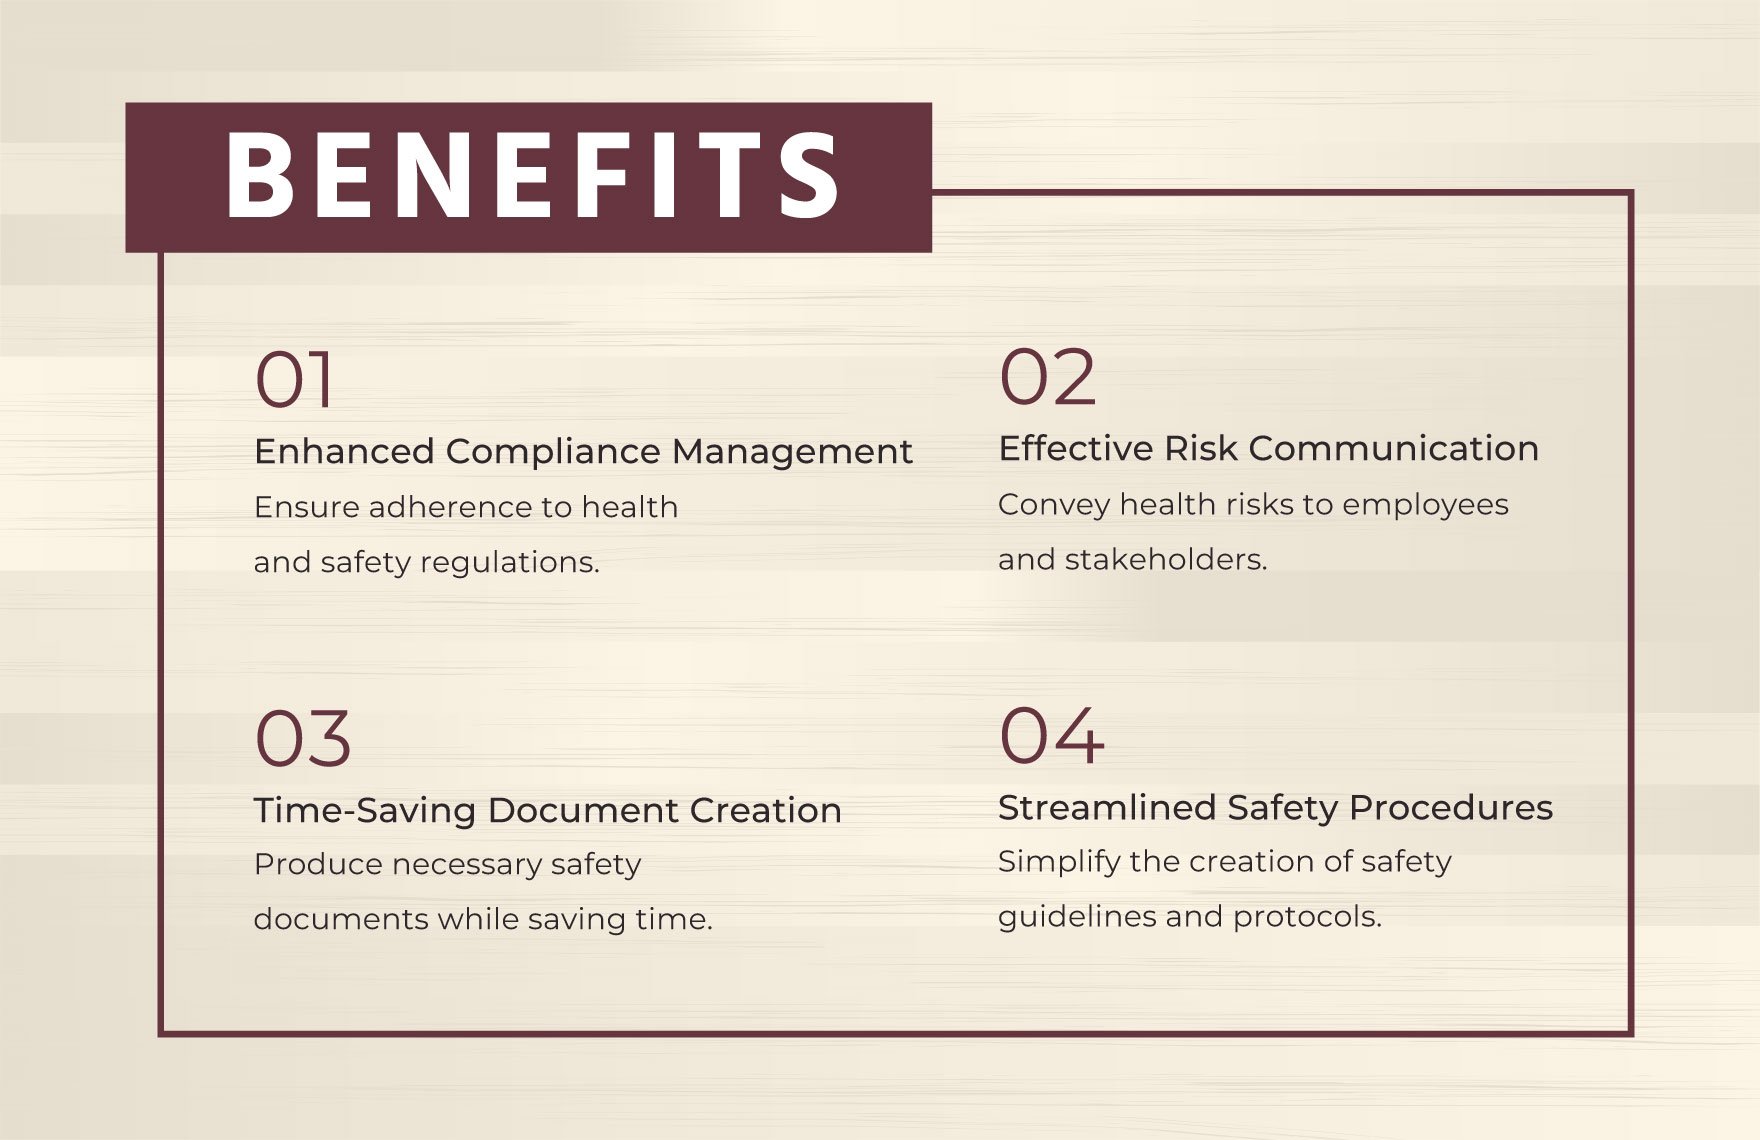 Workplace Safety Financial Analysis Template